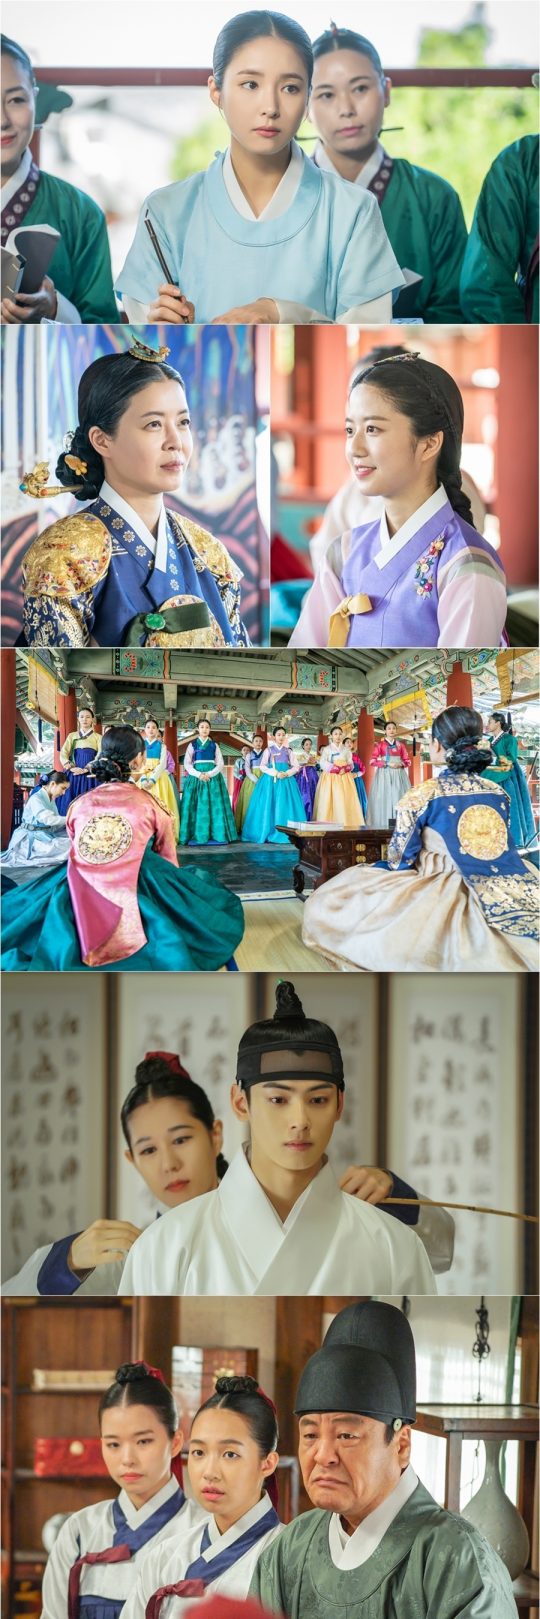 In MBCs Na Hae-ryung, Shin Se-kyung is responsible for Cha Eun-woos Wedding Bible record.Cha Eun-woo is ready for Wedding Bible with emotional eyes and attention is focused on the romance of the two.The new employee, Na Hae-ryung, unveiled the appearance of Na Hae-ryung and Lee Lim (Cha Eun-woo), who were in crisis due to a sudden Wedding Bible on the 5th.Na Hae-ryung and Lee Rim, who had been growing love for Alcondalkong in the 29th and 30th of the new cadets, were unintentionally open to public love as the dating scene was discovered.Lee Rim, who visited Dae-han Lim (Kim Yeo-jin) after hearing orders from Lee Tae (Kim Min-sang) of Hamyoung-gun, Hyun-wang, asked him to stop the marriage.Na Hae-ryung in the photo released on the day is a look that can not hide the confusion.Na Hae-ryung is in charge of Irims Wedding Bible course record, holding a brush as if resigned to his ironic fate.Then, the appearance of Lim and So-hwa (Kim Hyun-soo), who are facing each other, catches the eye.I am smiling satisfied that Im likes the clear and simple appearance of the movie which stands out among the candidates of Gan Taek.Lee Rims eyes on the Wedding Bible Bok Foundation seem to be full of sadness.Her Sambo (Seongjiru), an inner tube who has been around Leerim for a long time, is also watching Leerim with a look that he will cry at any moment.Regardless of Na Hae-ryung and Irims mind, were going to be ready for Wedding Bible quickly, said the new employee, and I hope you can check on the broadcast how their romance will flow as Na Hae-ryung is in charge of the record of Leerims sadism, like a prank of fate.The new employee, Na Hae-ryung, will air at 8:55 p.m. on the 5th.